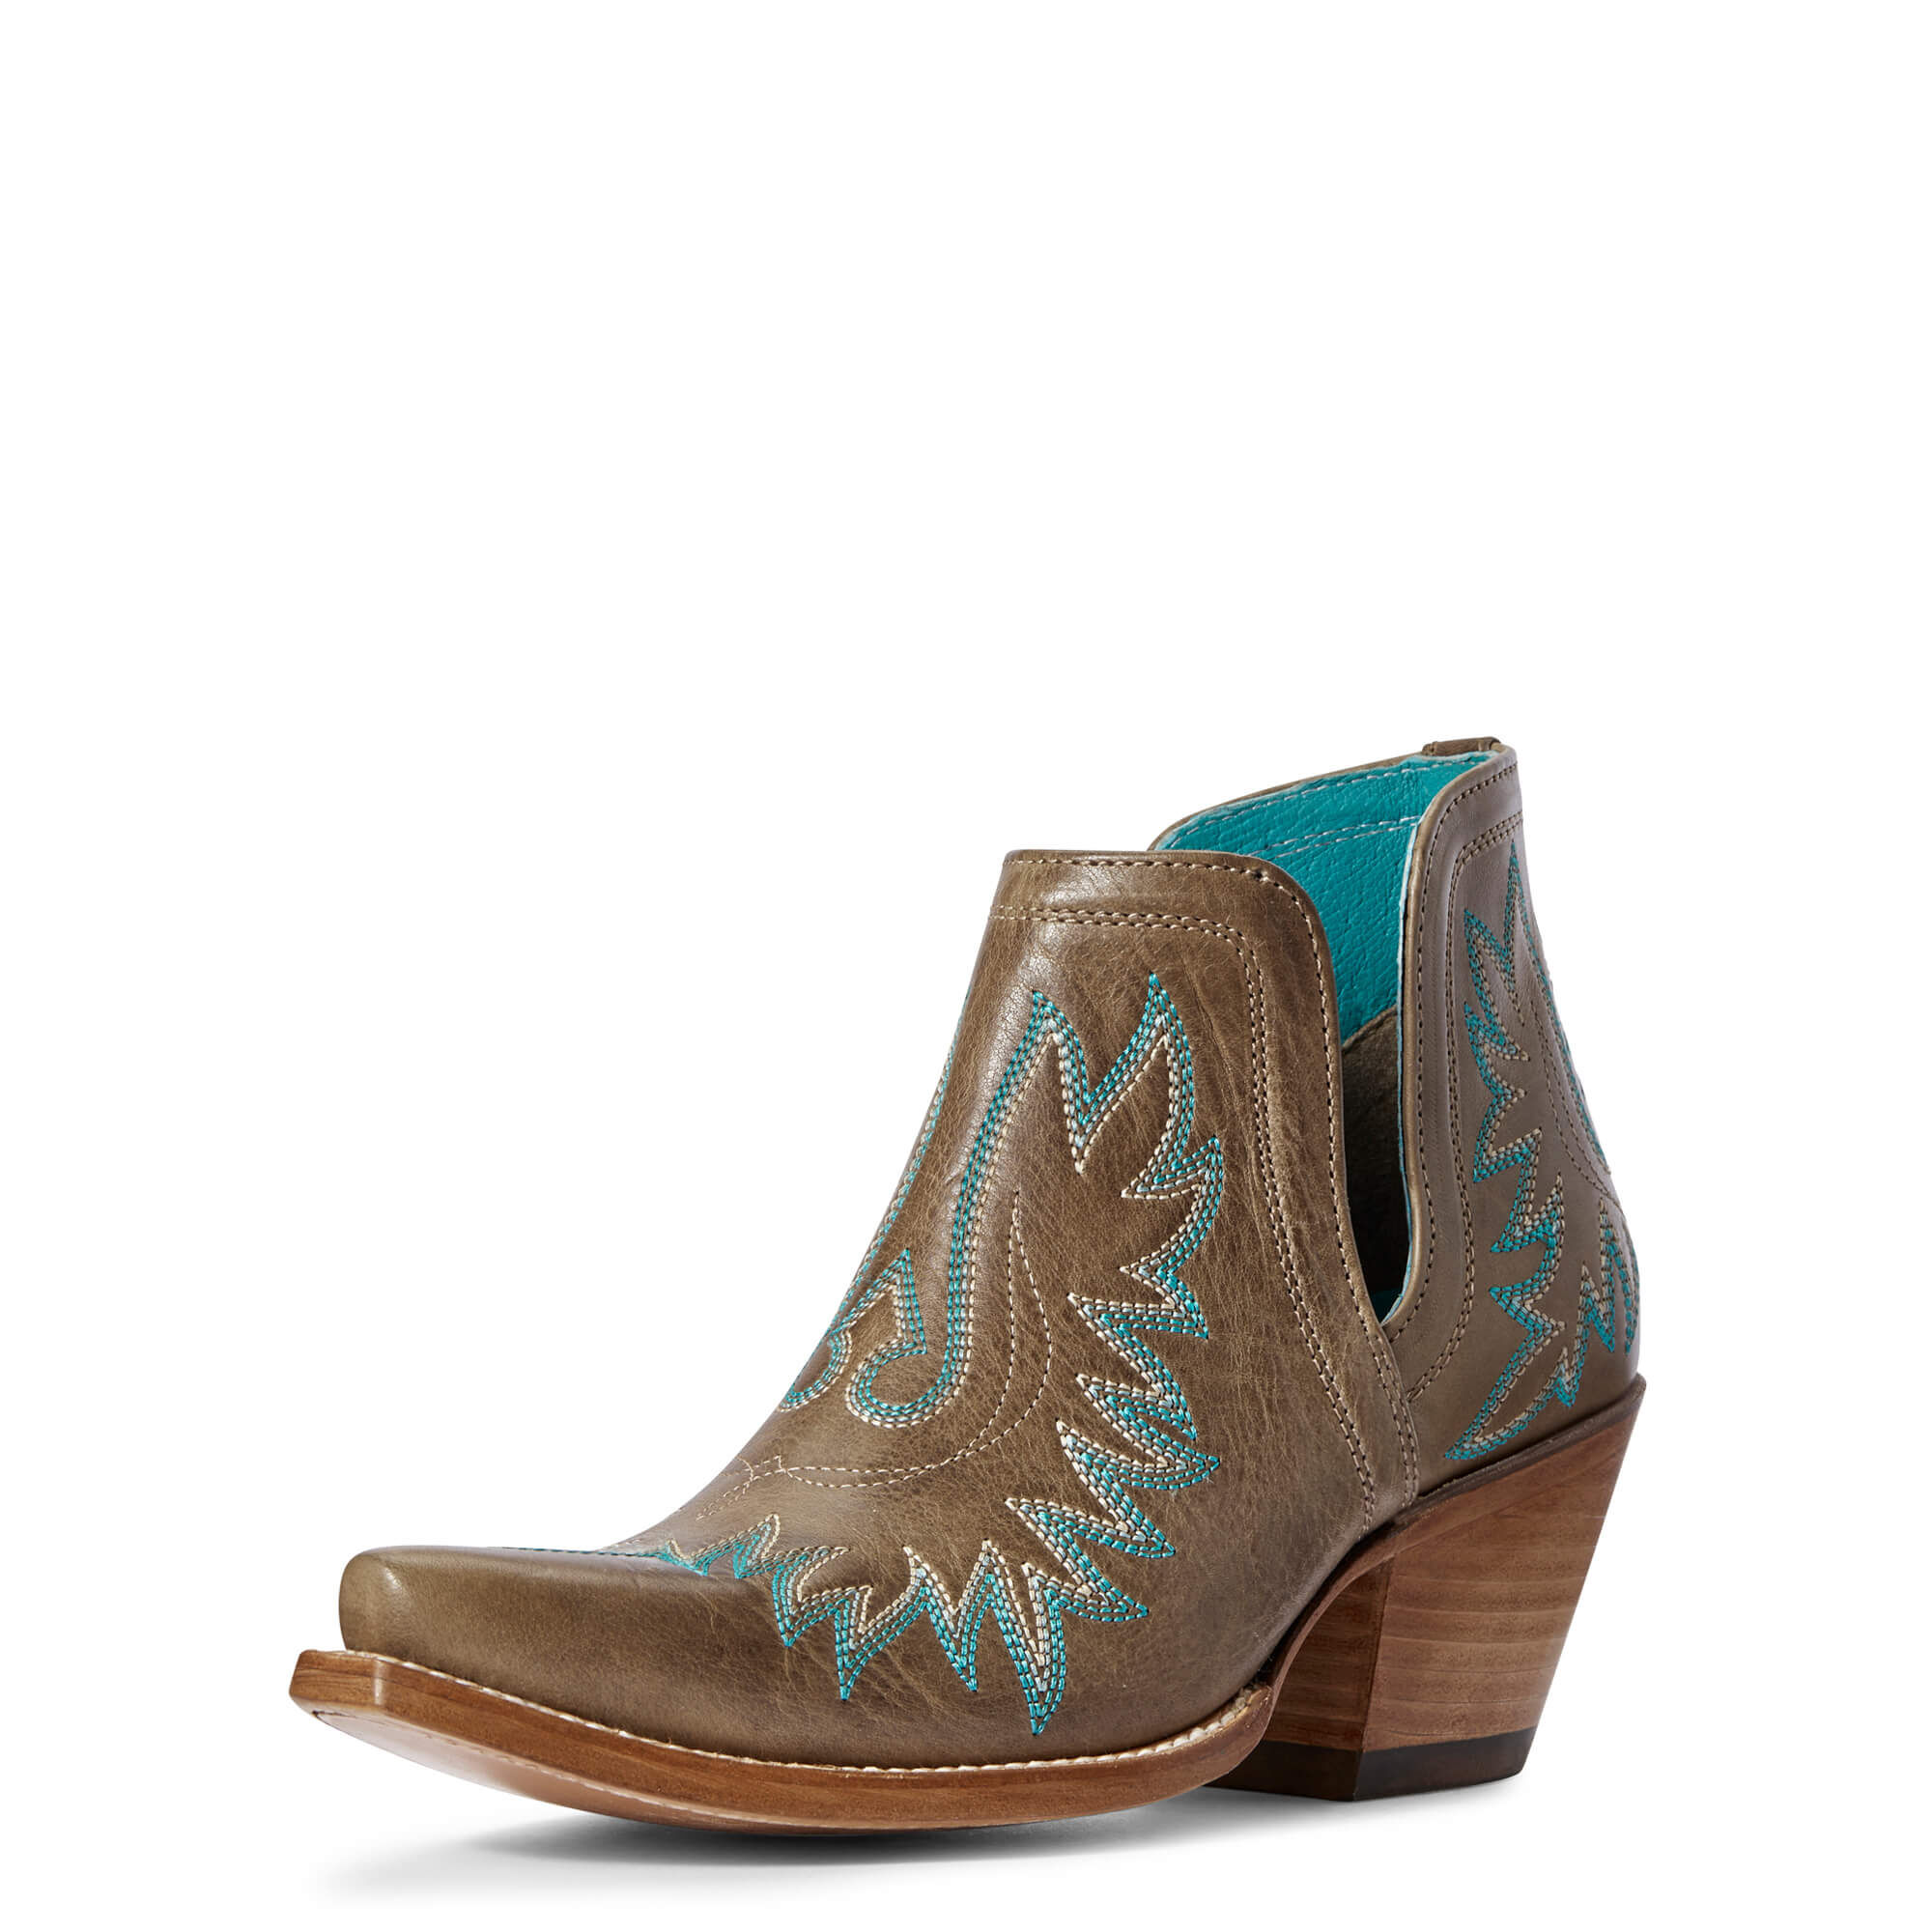 Ariat Sale \u0026 Clearance - Ariat Clothing 